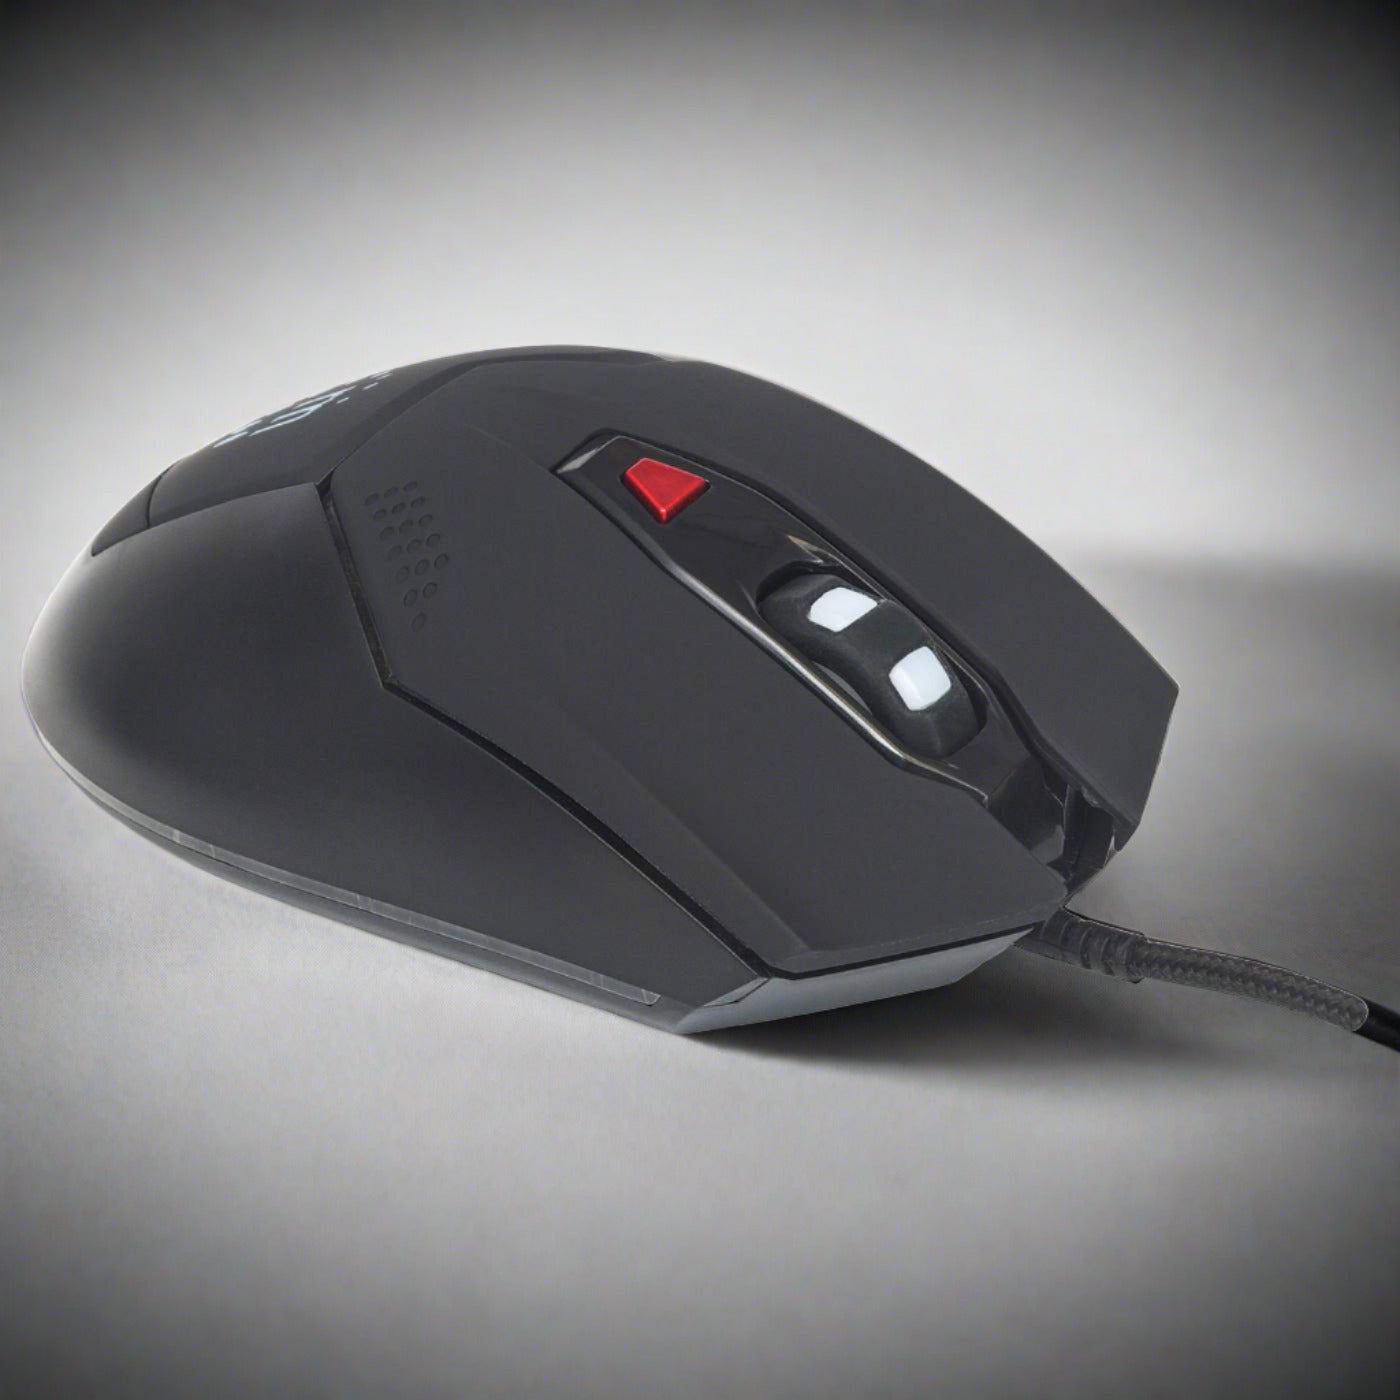 Wired Optical Gaming Mouse with LEDs